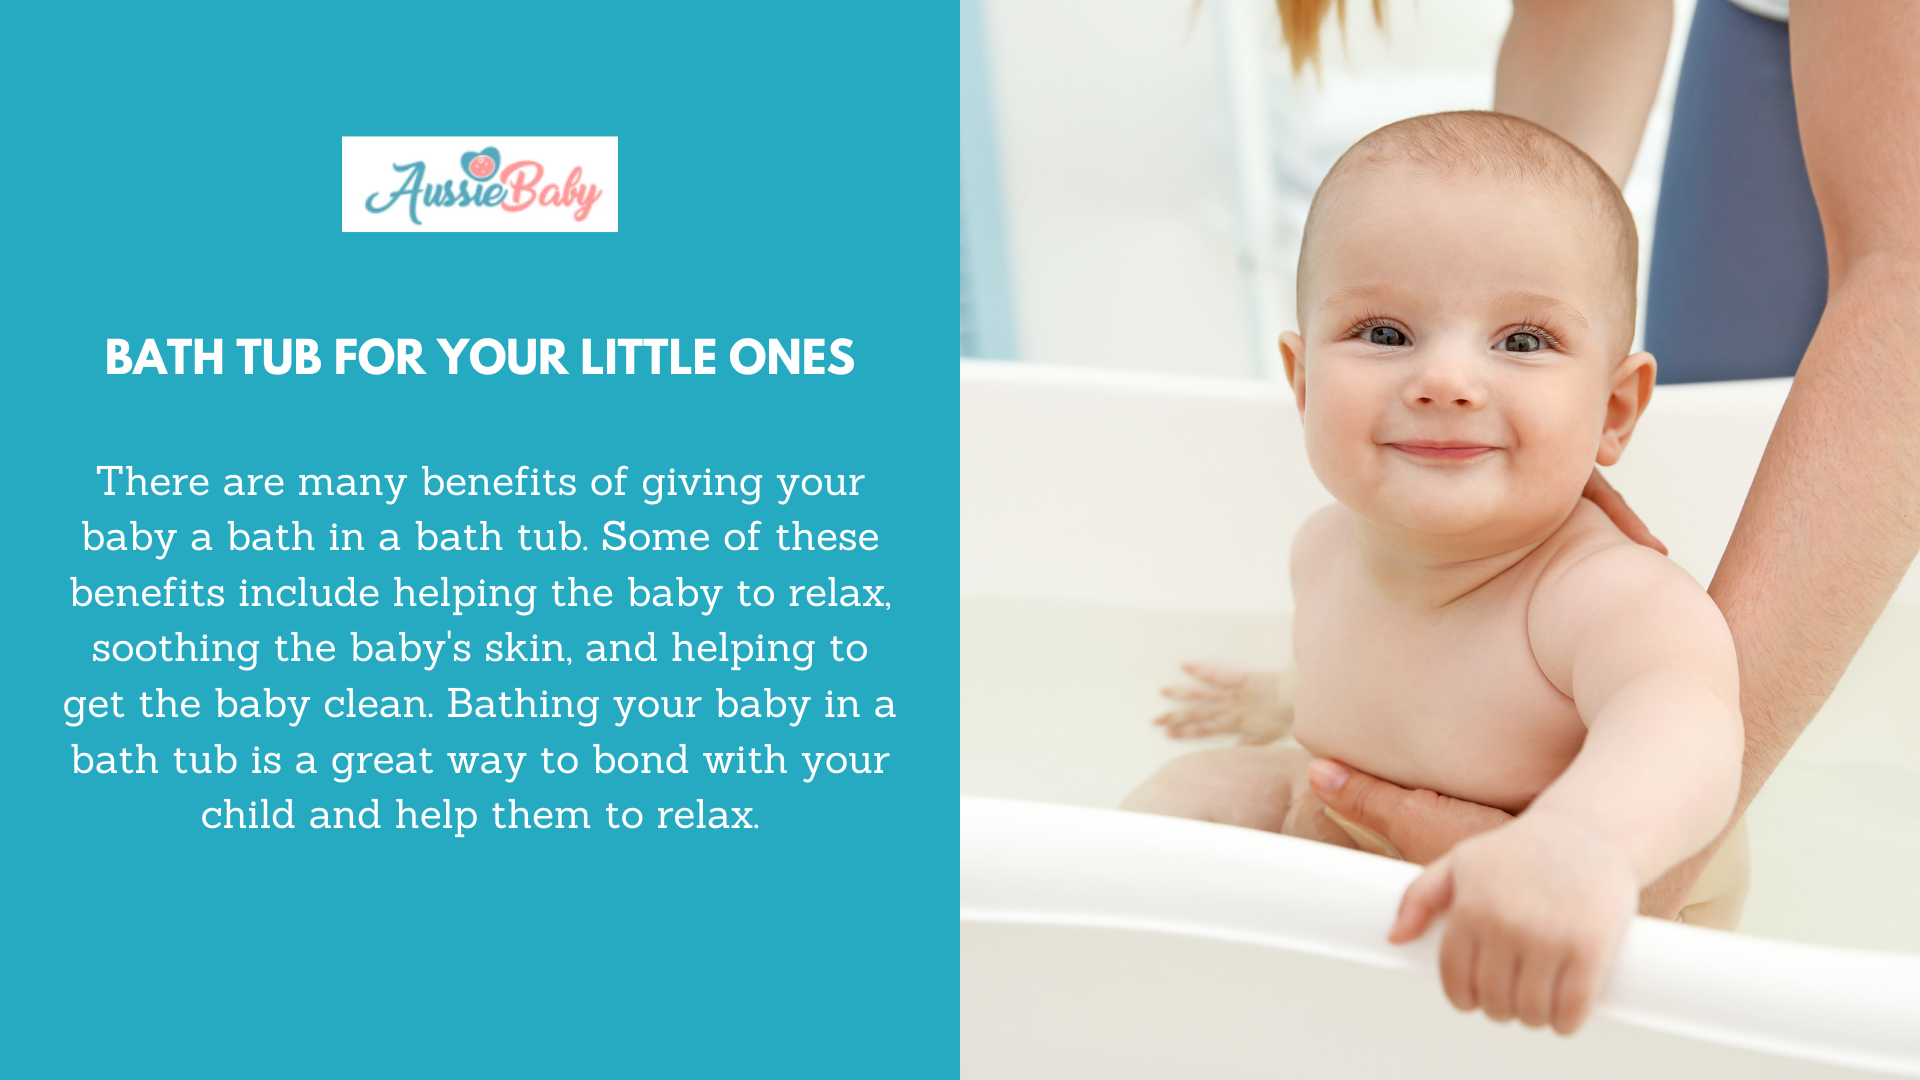 Bath Tub For Your Little Ones – Aussie Baby